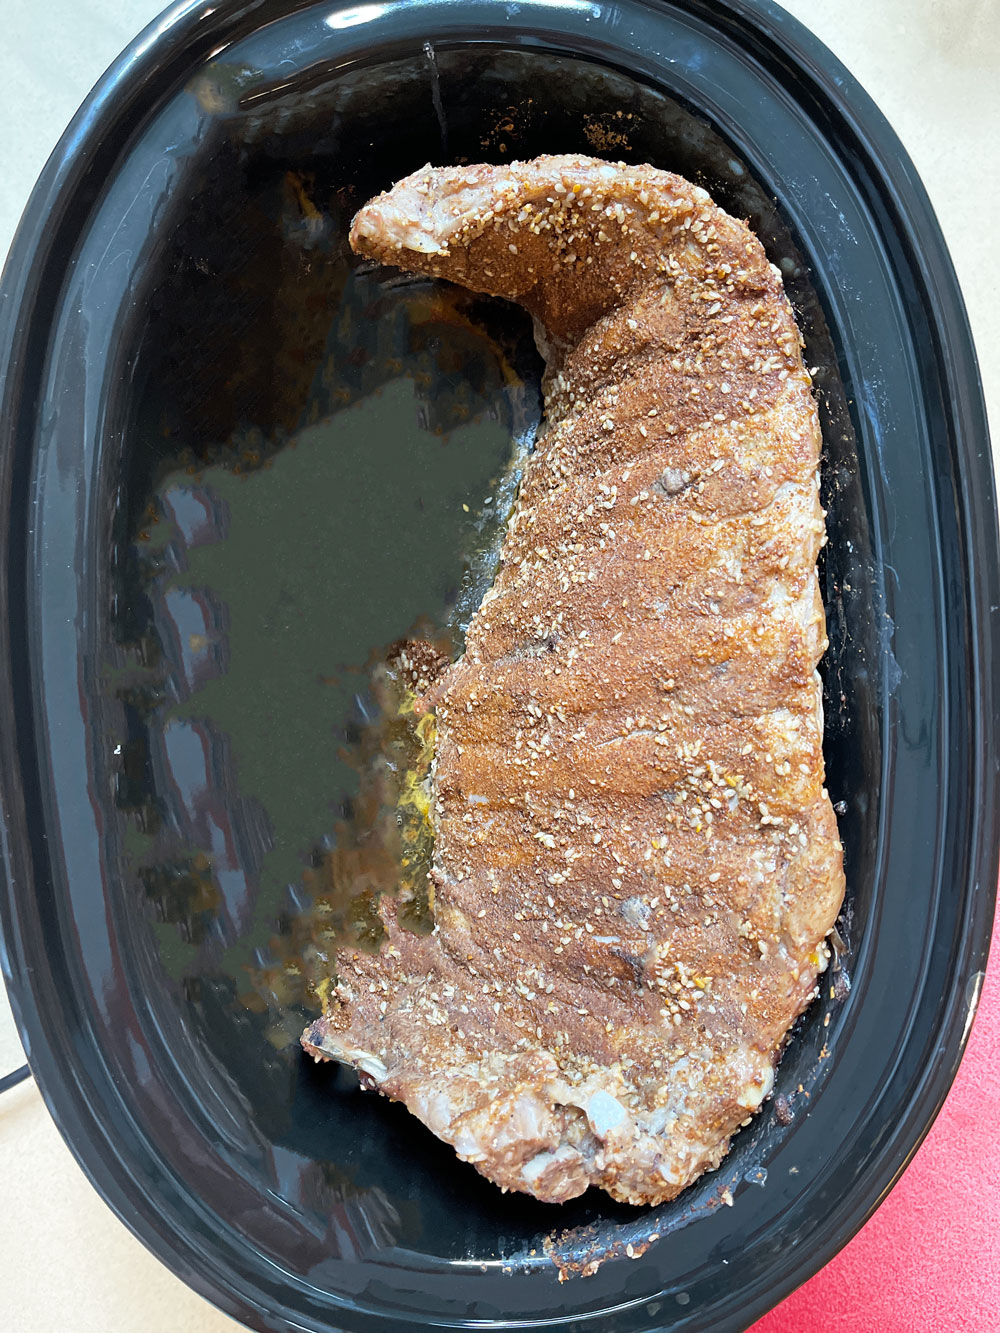 The Best Slow Cooker Ribs. The juiciest ribs can be made in the crock pot with very little work. Happy Cooking! www.ChopHappy.com #ribsrecipe #slowcookerrecipe